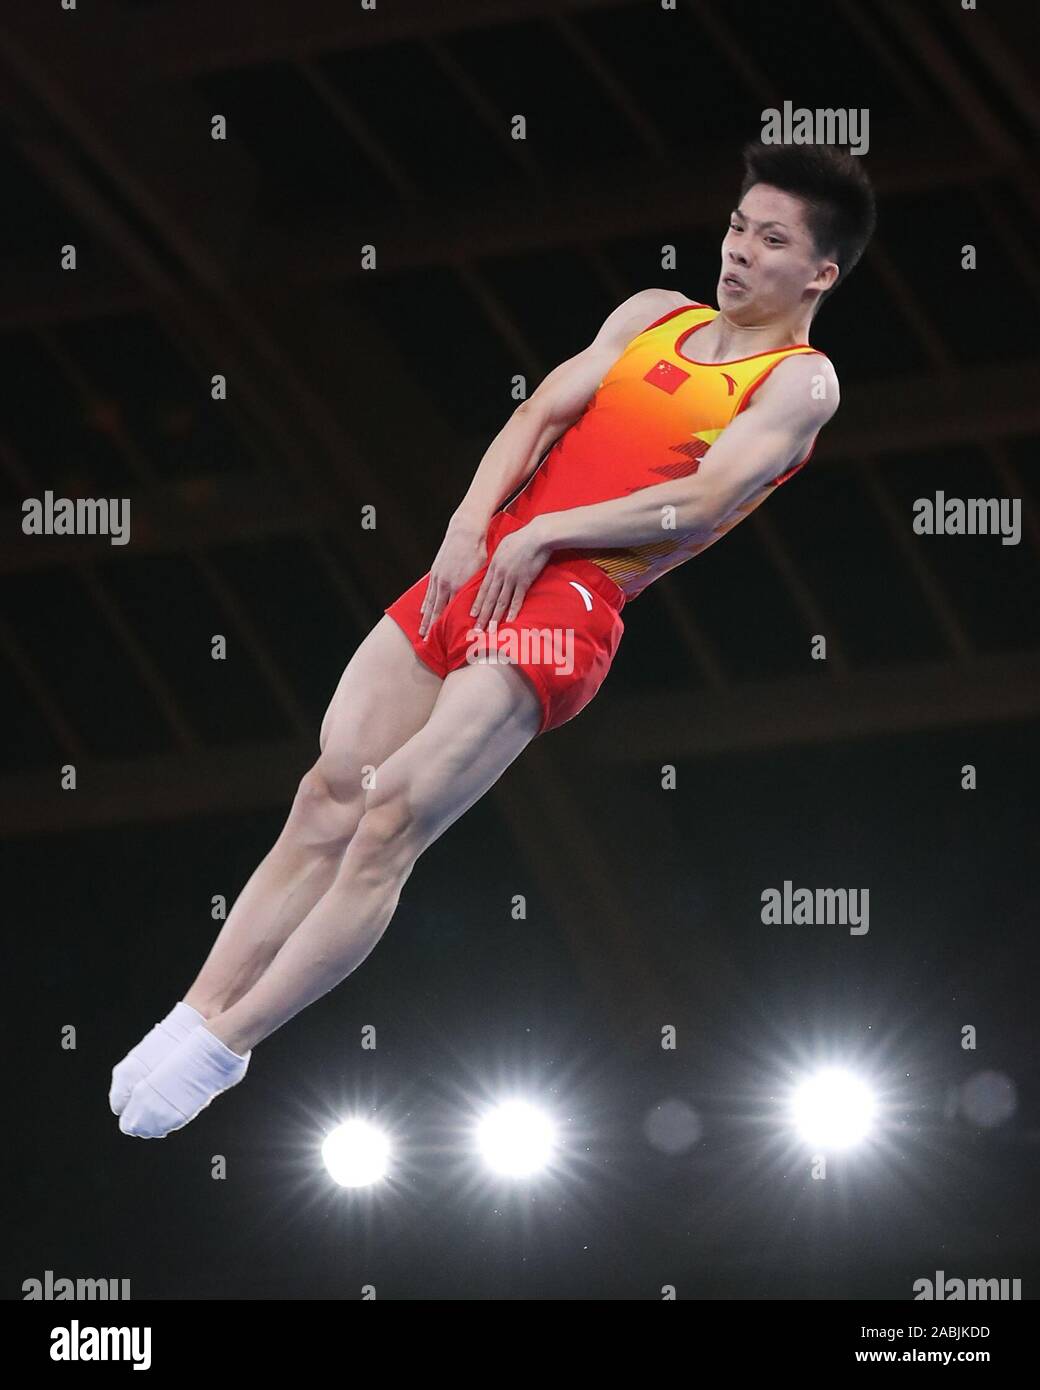 Tokyo, Japan. 28th Nov, 2019. Yan Langyu of China competes during the Men's  Trampoline Individual Qualifications at the 34th FIG Trampoline Gymnastics  World Championships in Tokyo, Japan, Nov. 28, 2019. Credit: Du